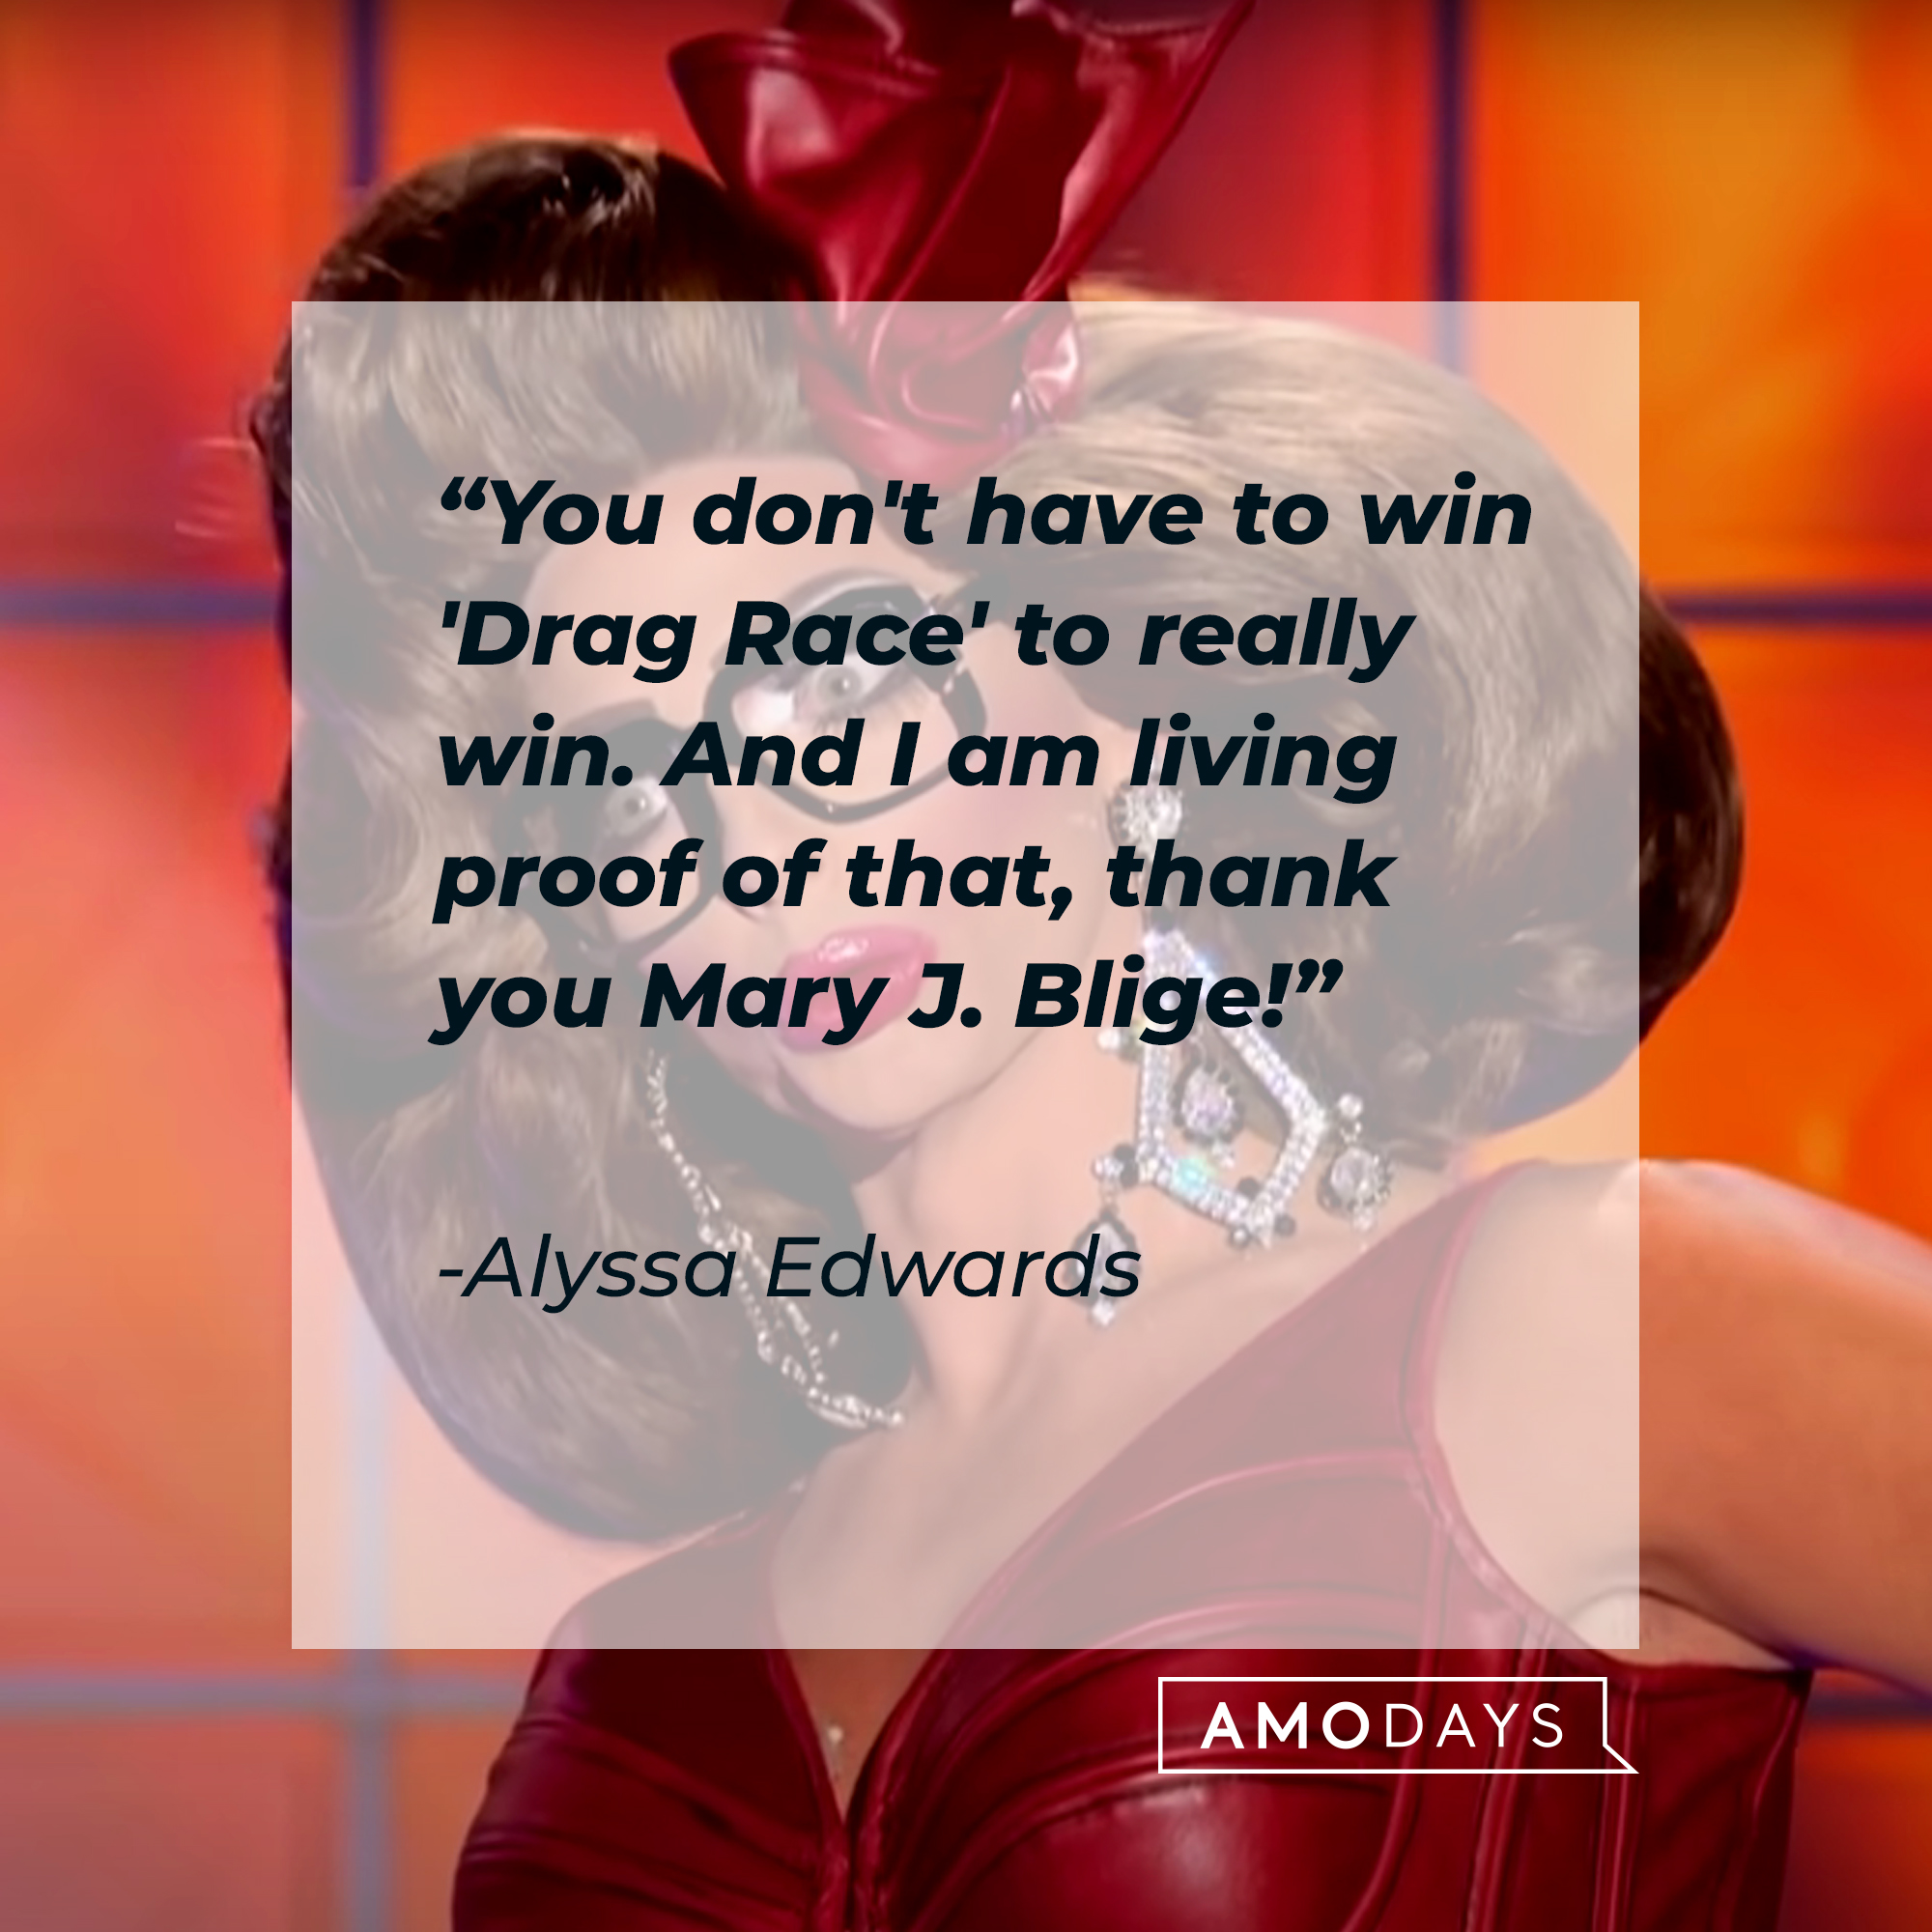 Alyssa Edwards's quote: “You don't have to win 'Drag Race' to really win. And I am living proof of that, thank you Mary J. Blige!” | Source: youtube.com/rupaulsdragrace